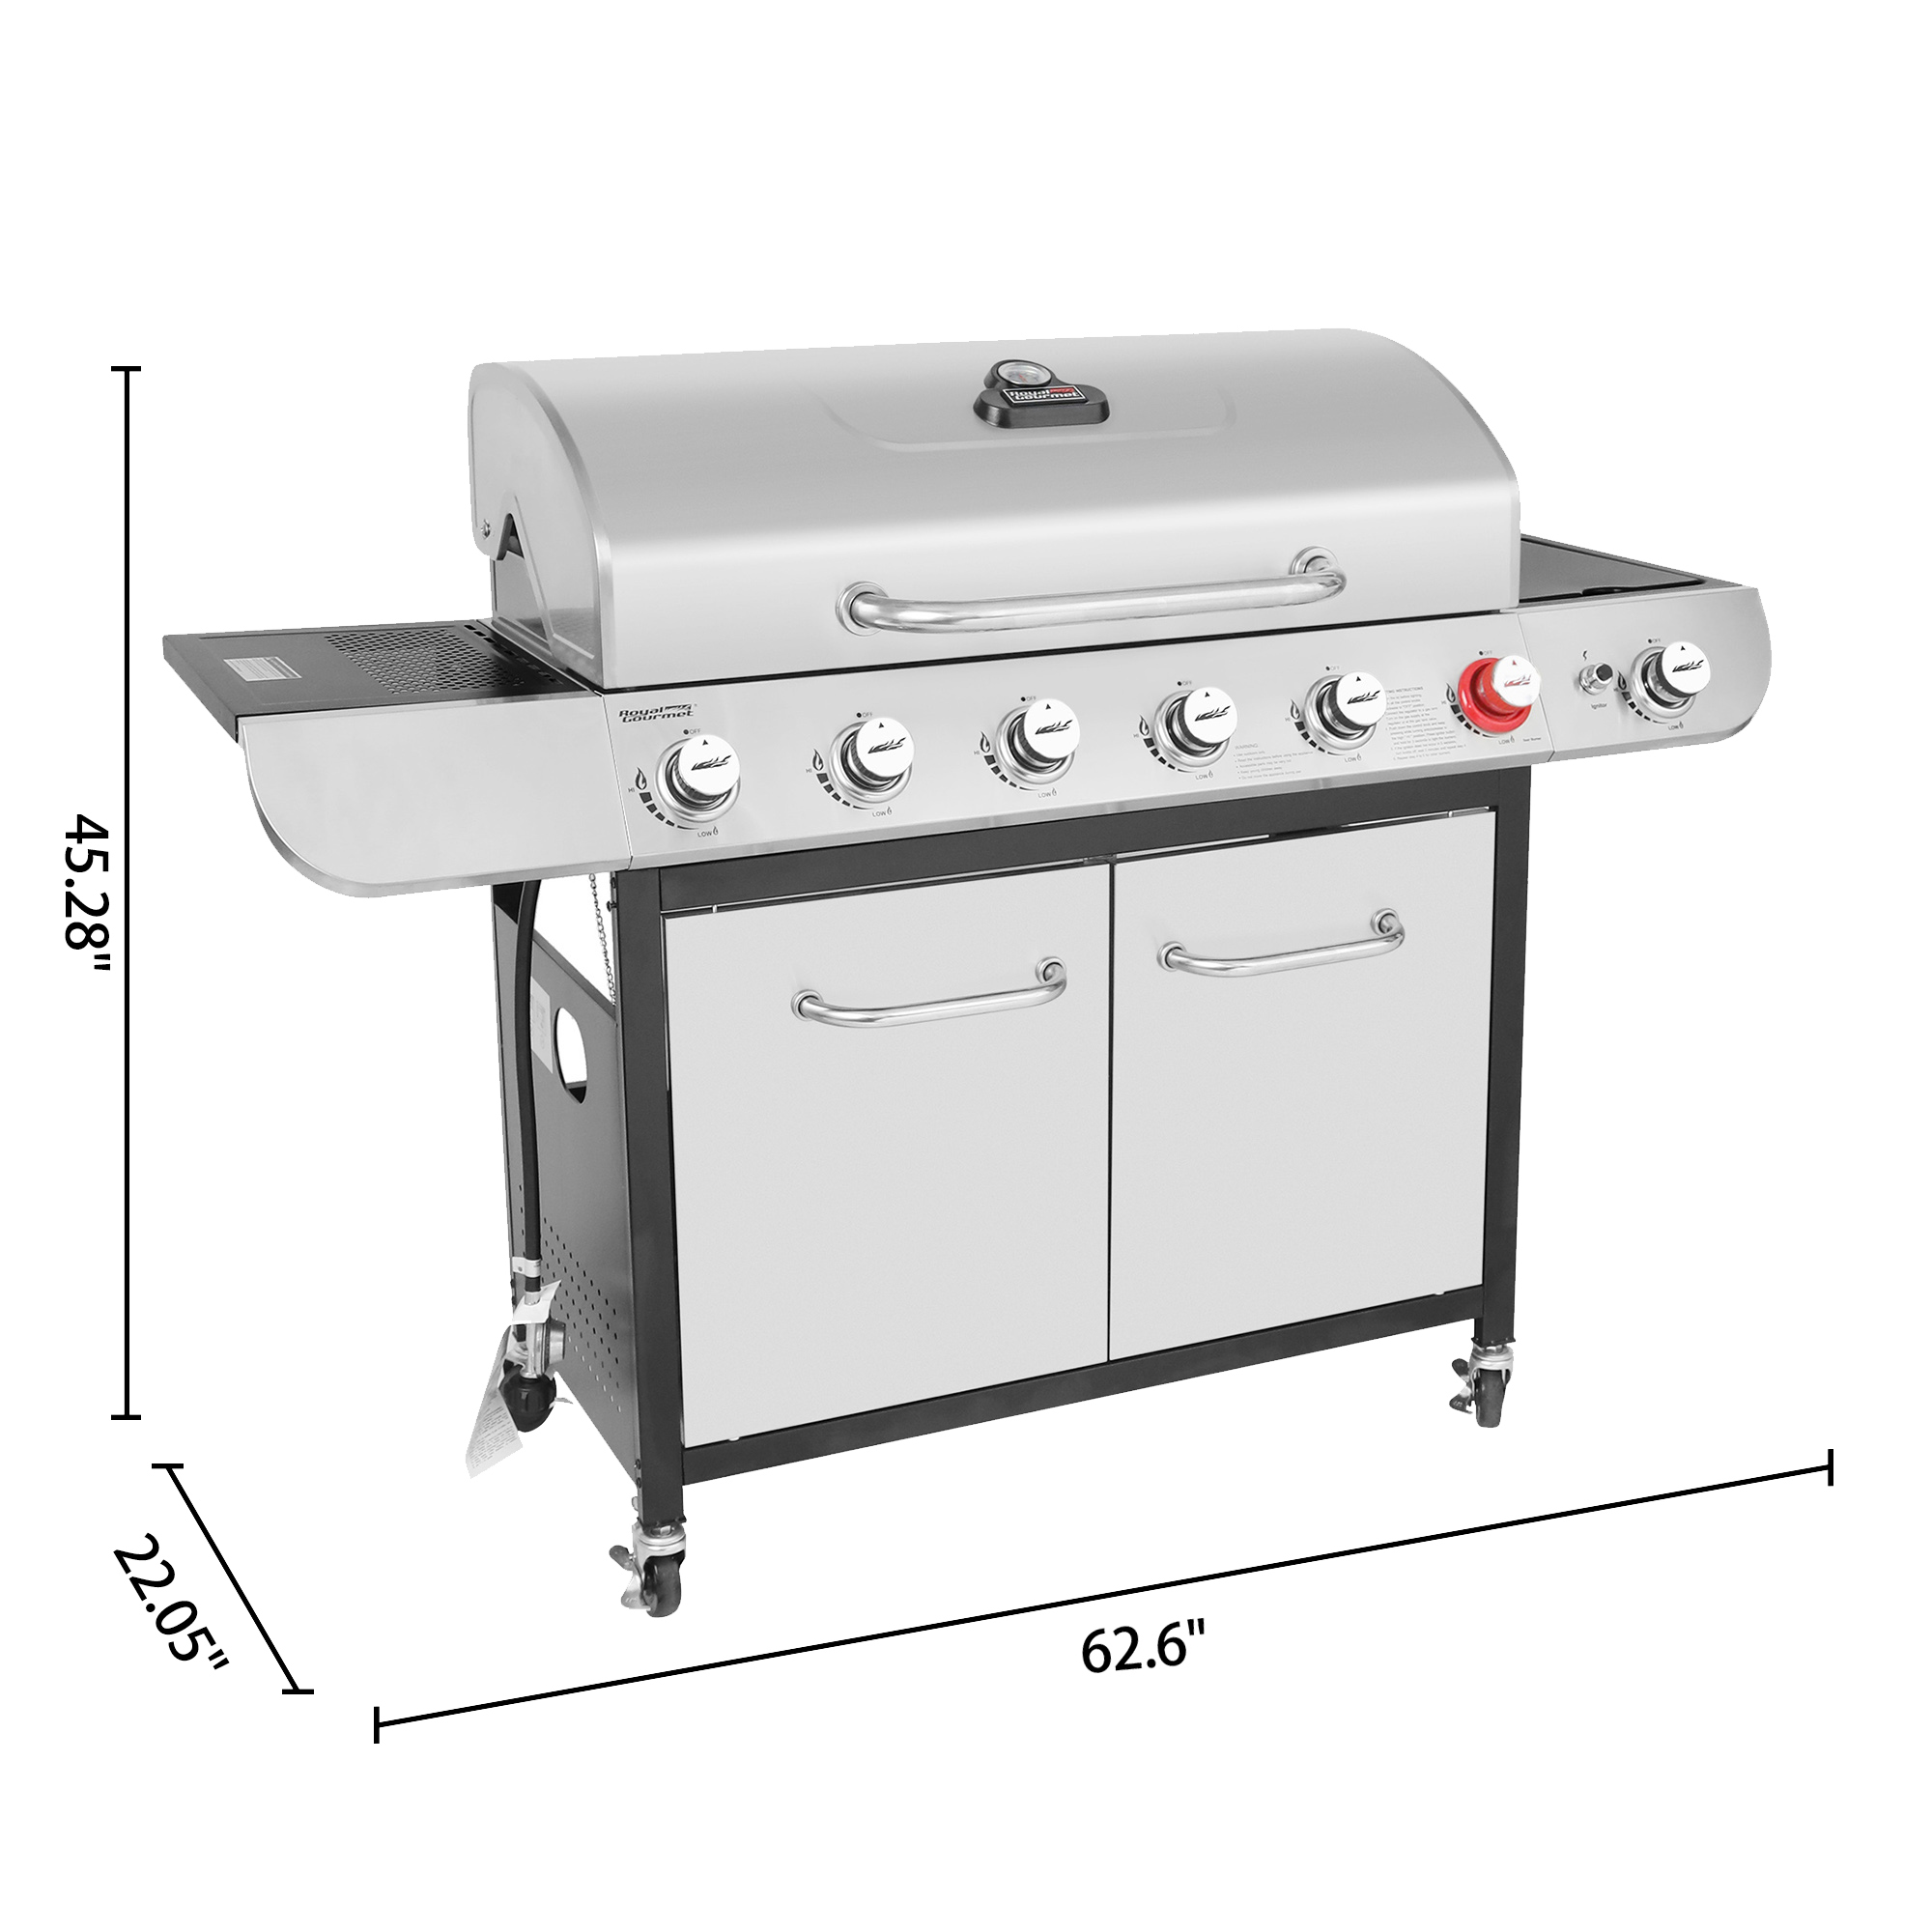 Royal Gourmet SG6002 Classic 6-Burner 71000-BTU LP Gas Grill with Sear Burner and Side Burner, Stainless Steel - image 3 of 8